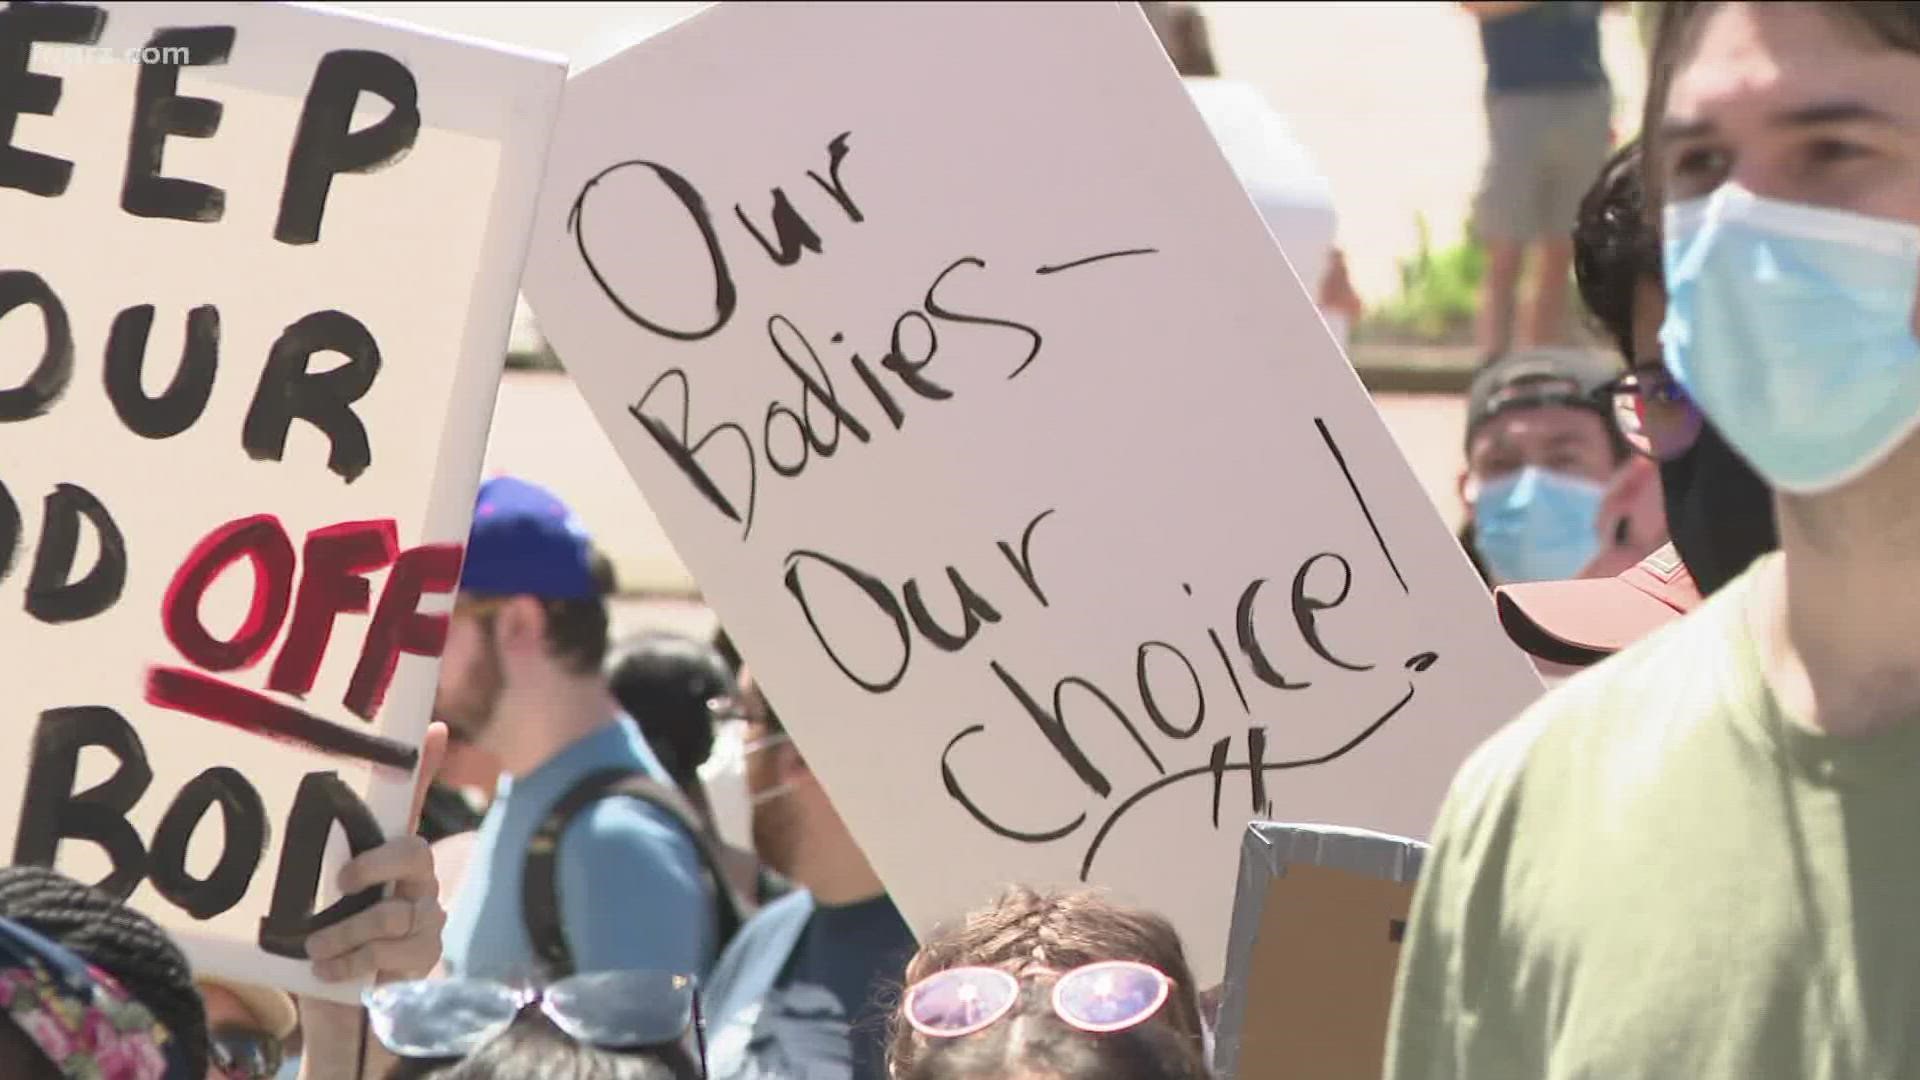 The protest was a response to the drafted Supreme Court opinion that would overturn Roe v. Wade.